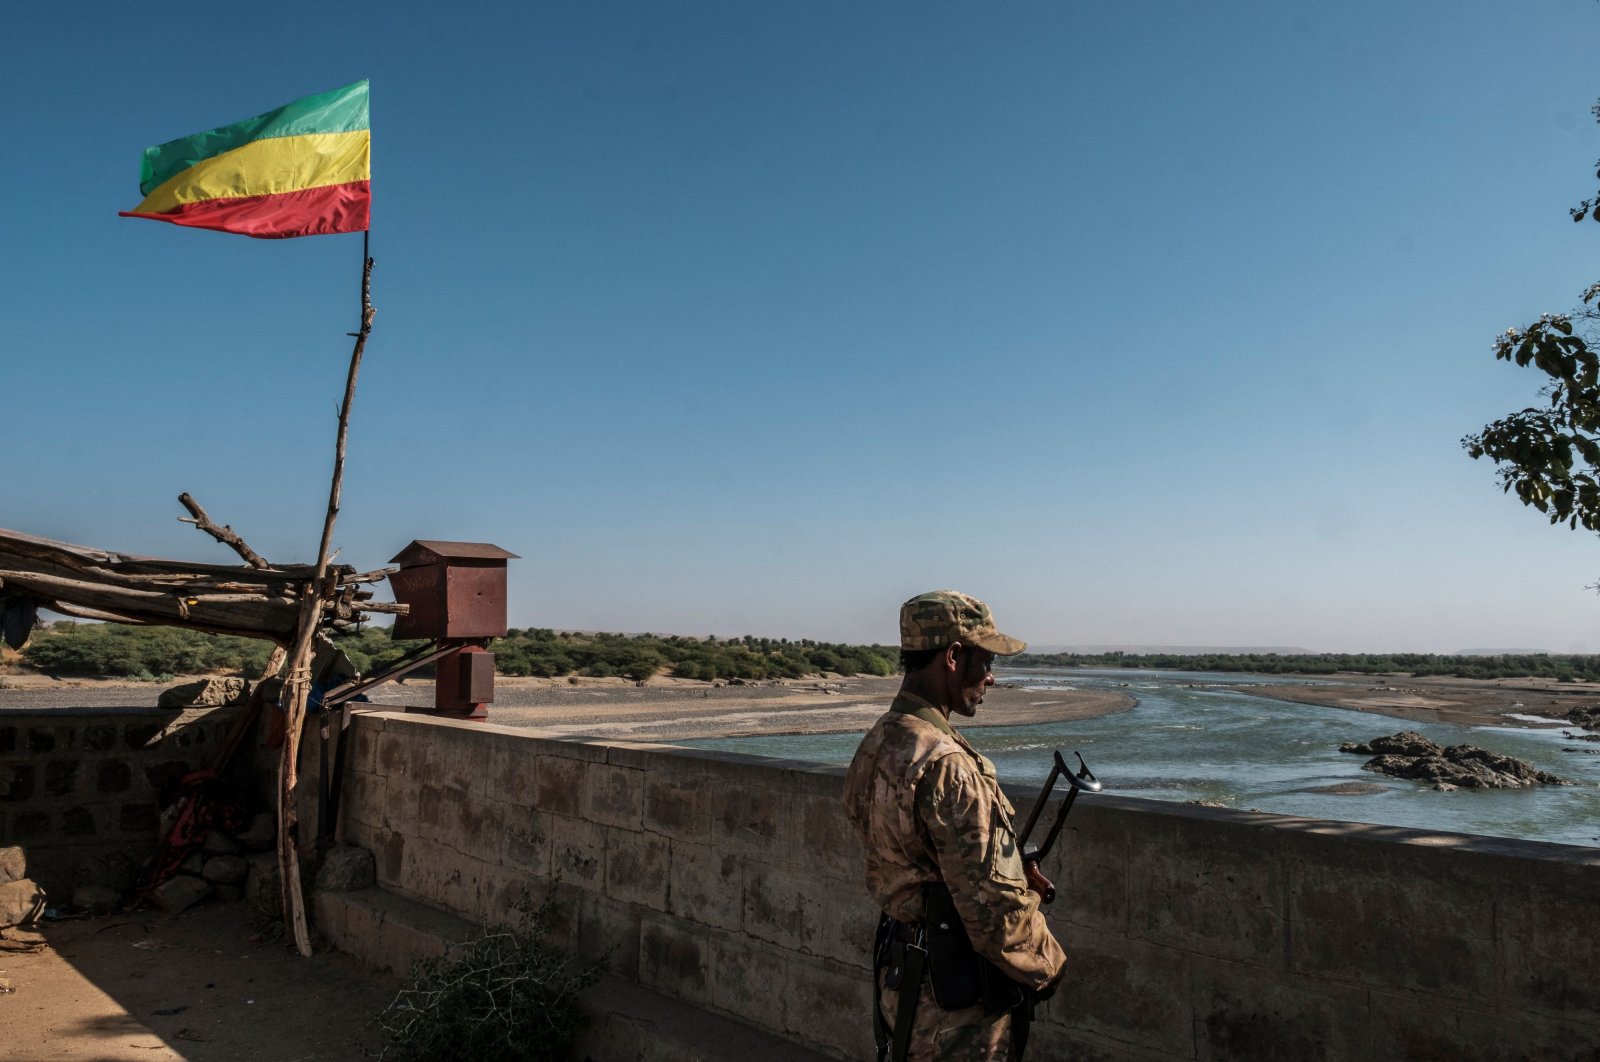 A member of the Amhara Special Forces watches on at the border crossing with Eritrea where an outdated Ethiopian flag waves, in Humera, Ethiopia, Nov. 22, 2020. (AFP)